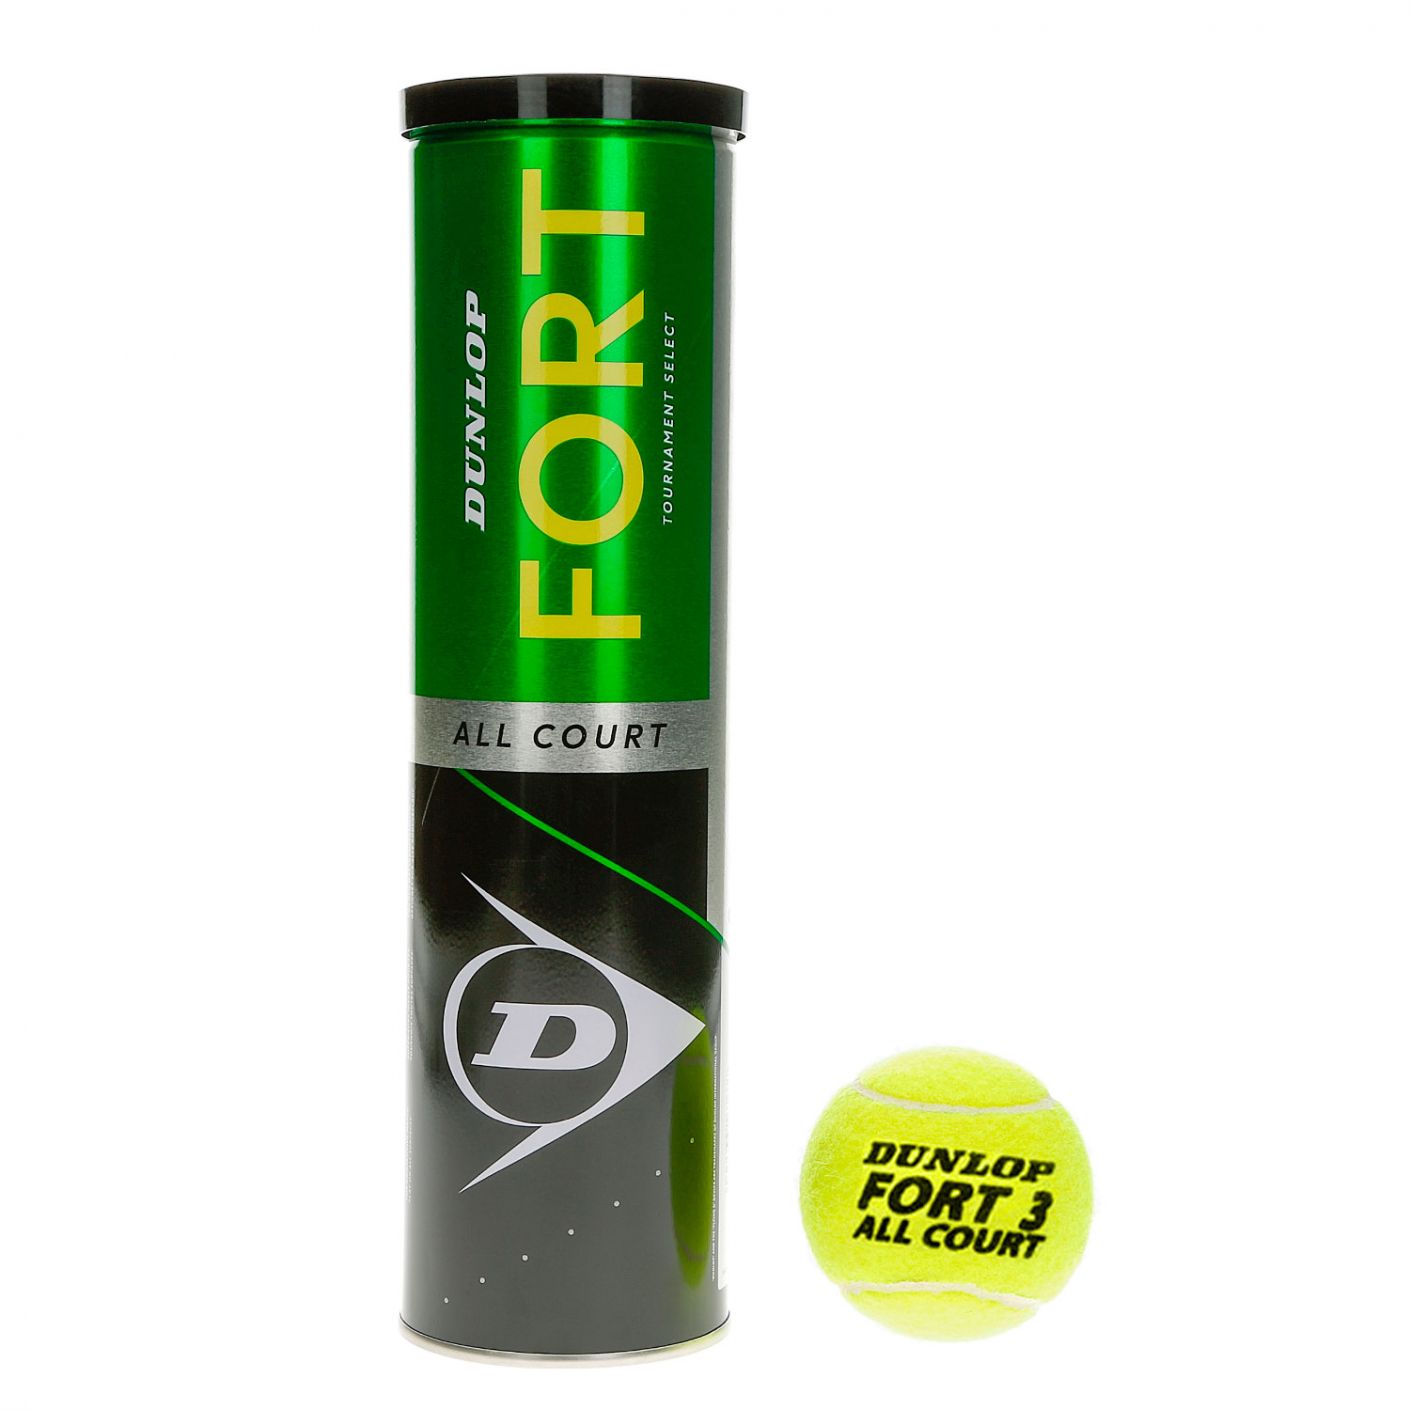 Dunlop Fort All Court Tournament Select Ball Tube